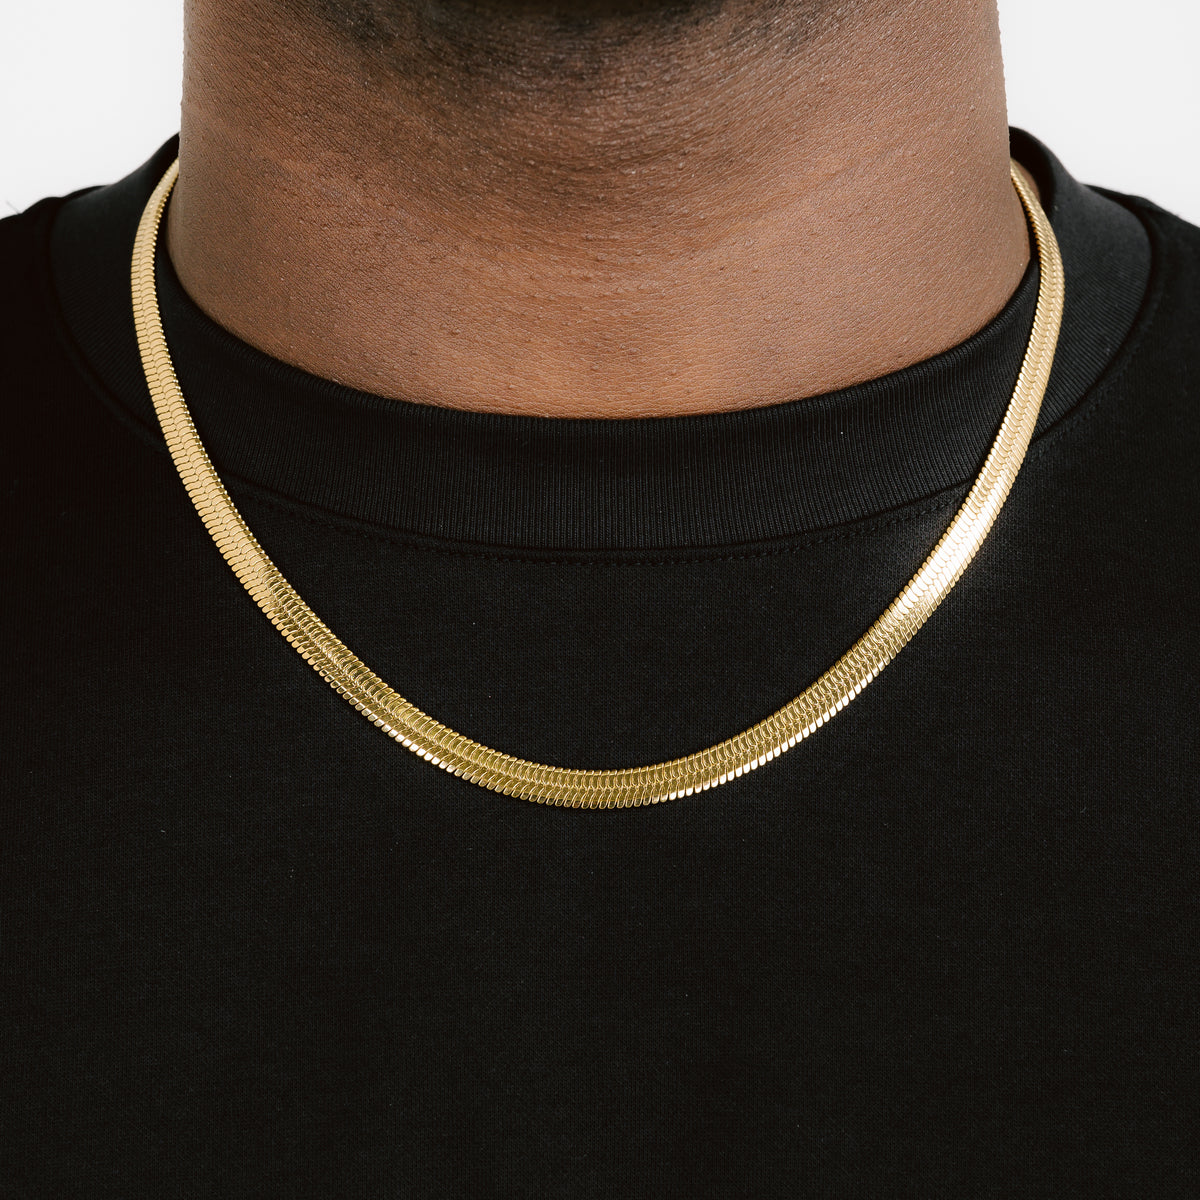 14k Yellow Gold 2.5mm Oval Herringbone Chain Necklace 18 Inches | Sarraf.com